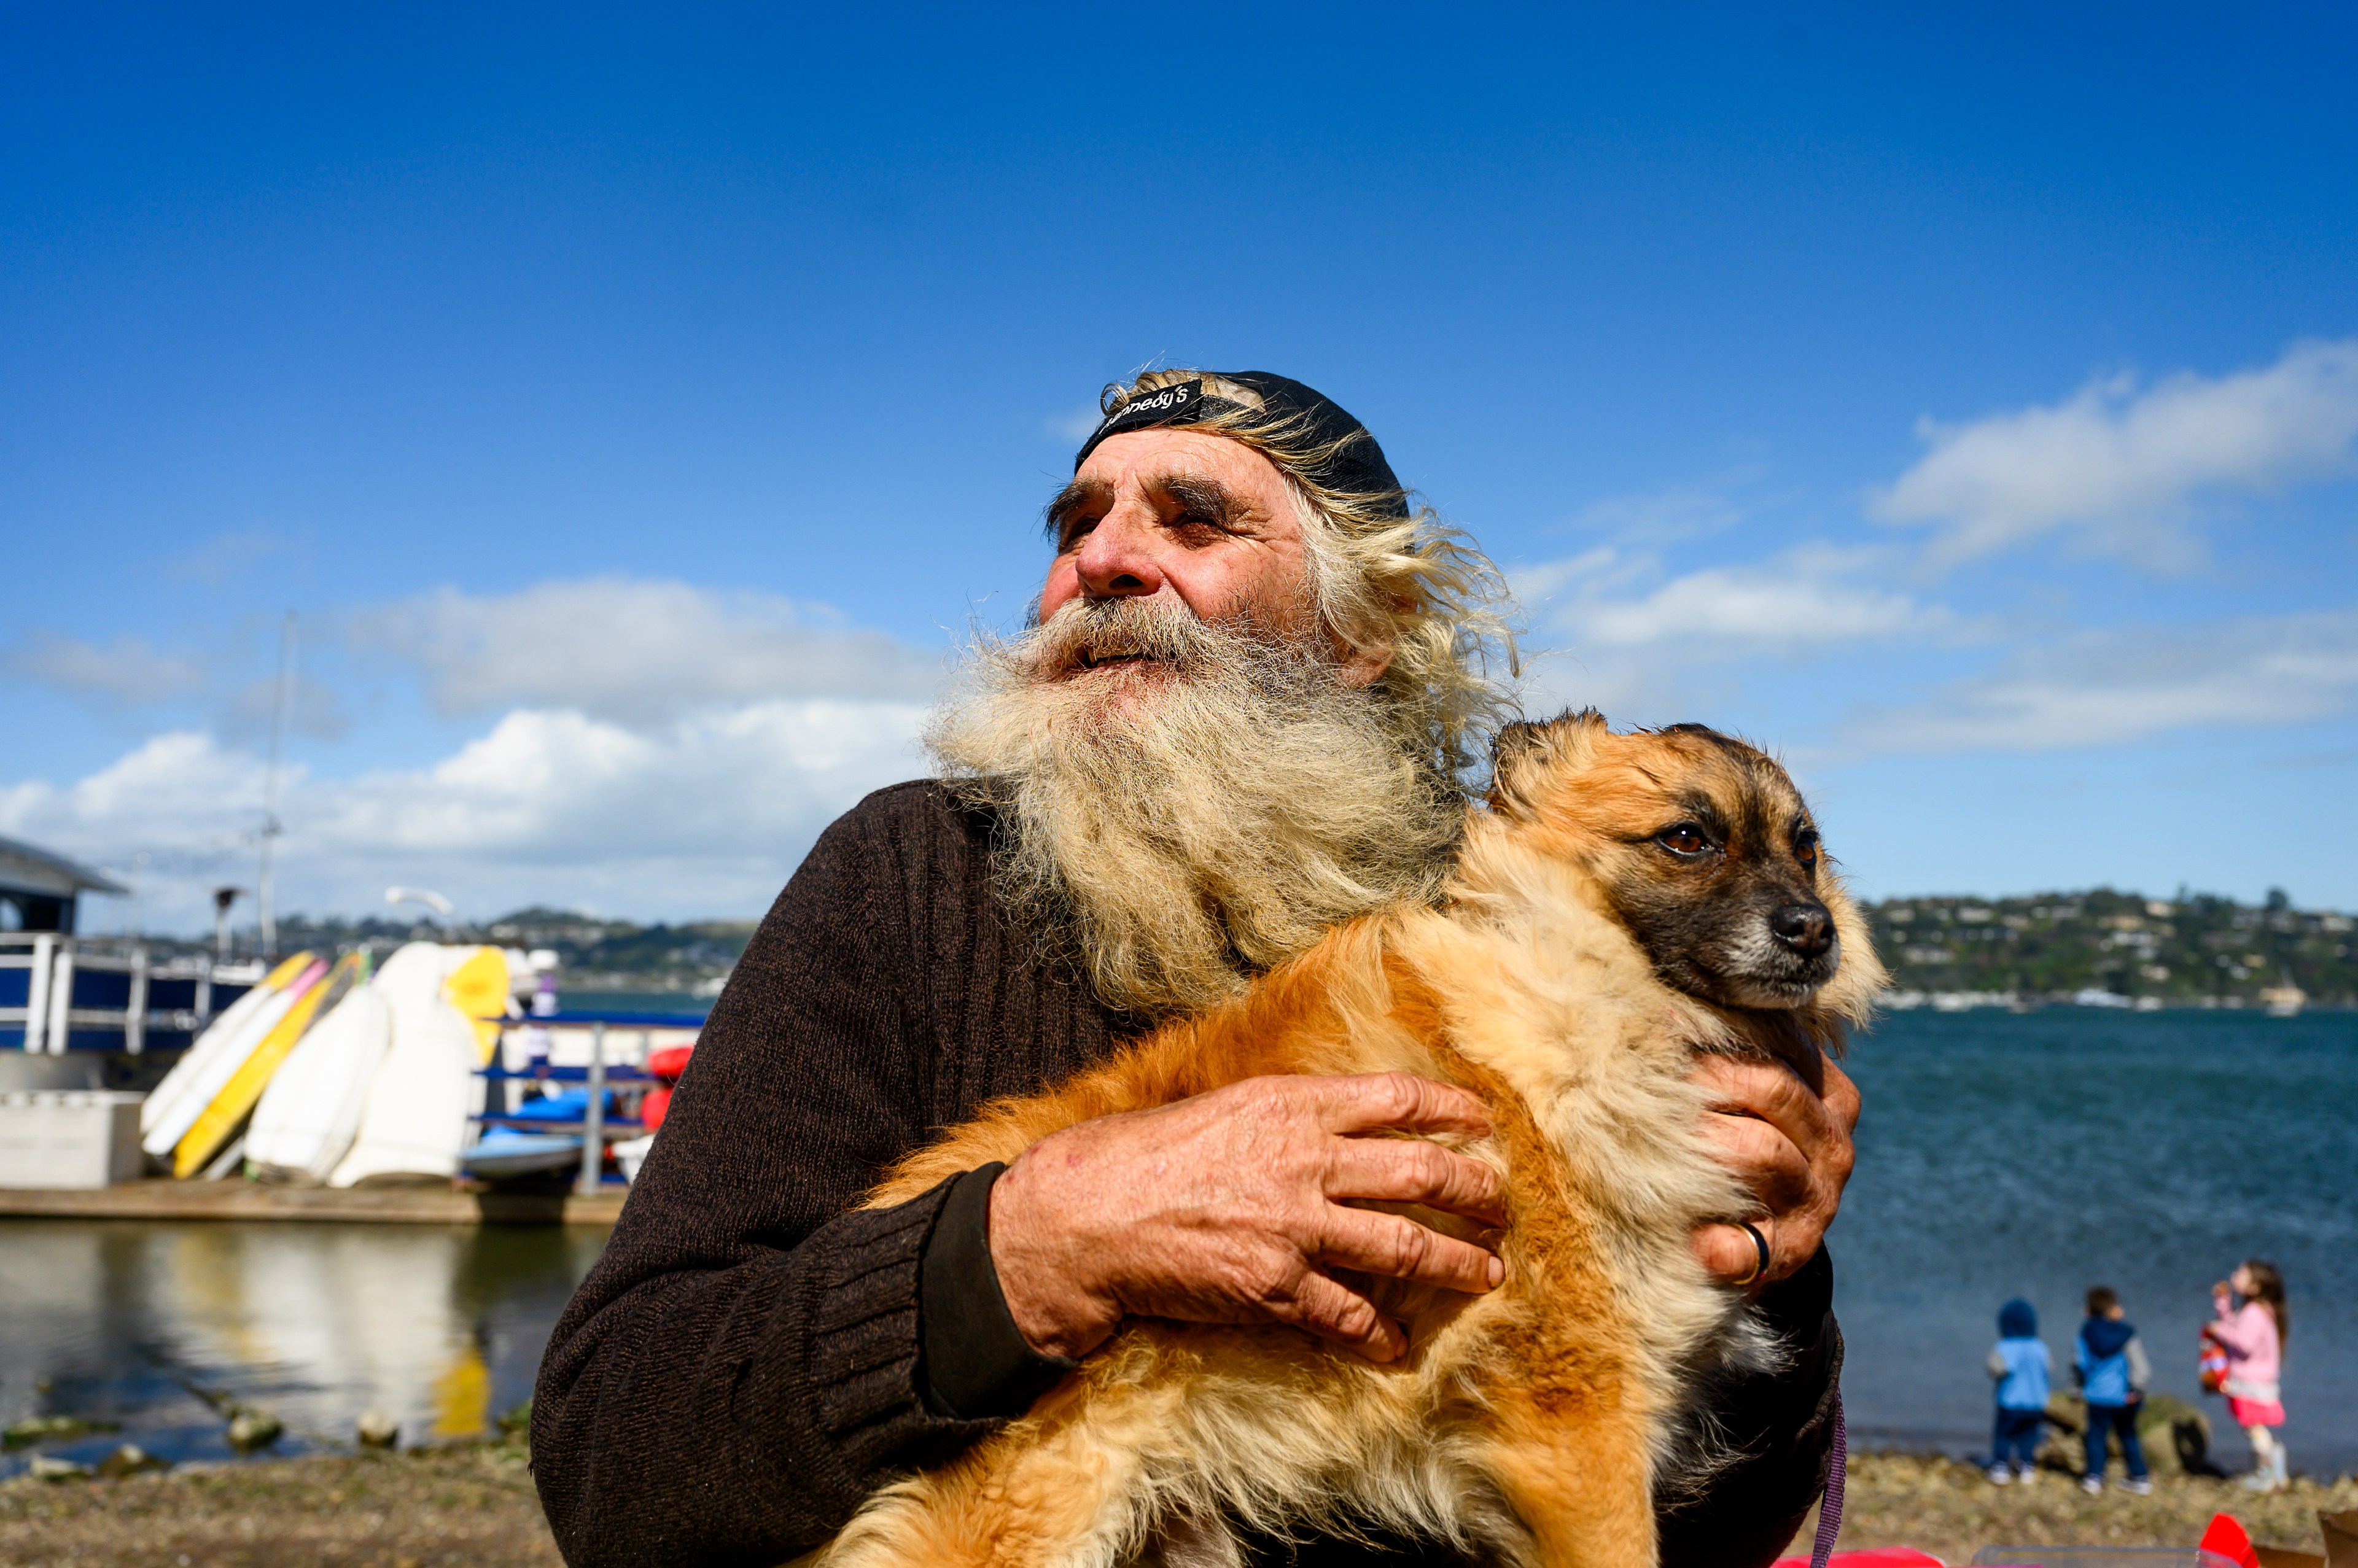 A man with a long beard holds a dog by the water, with children and boats in the background.